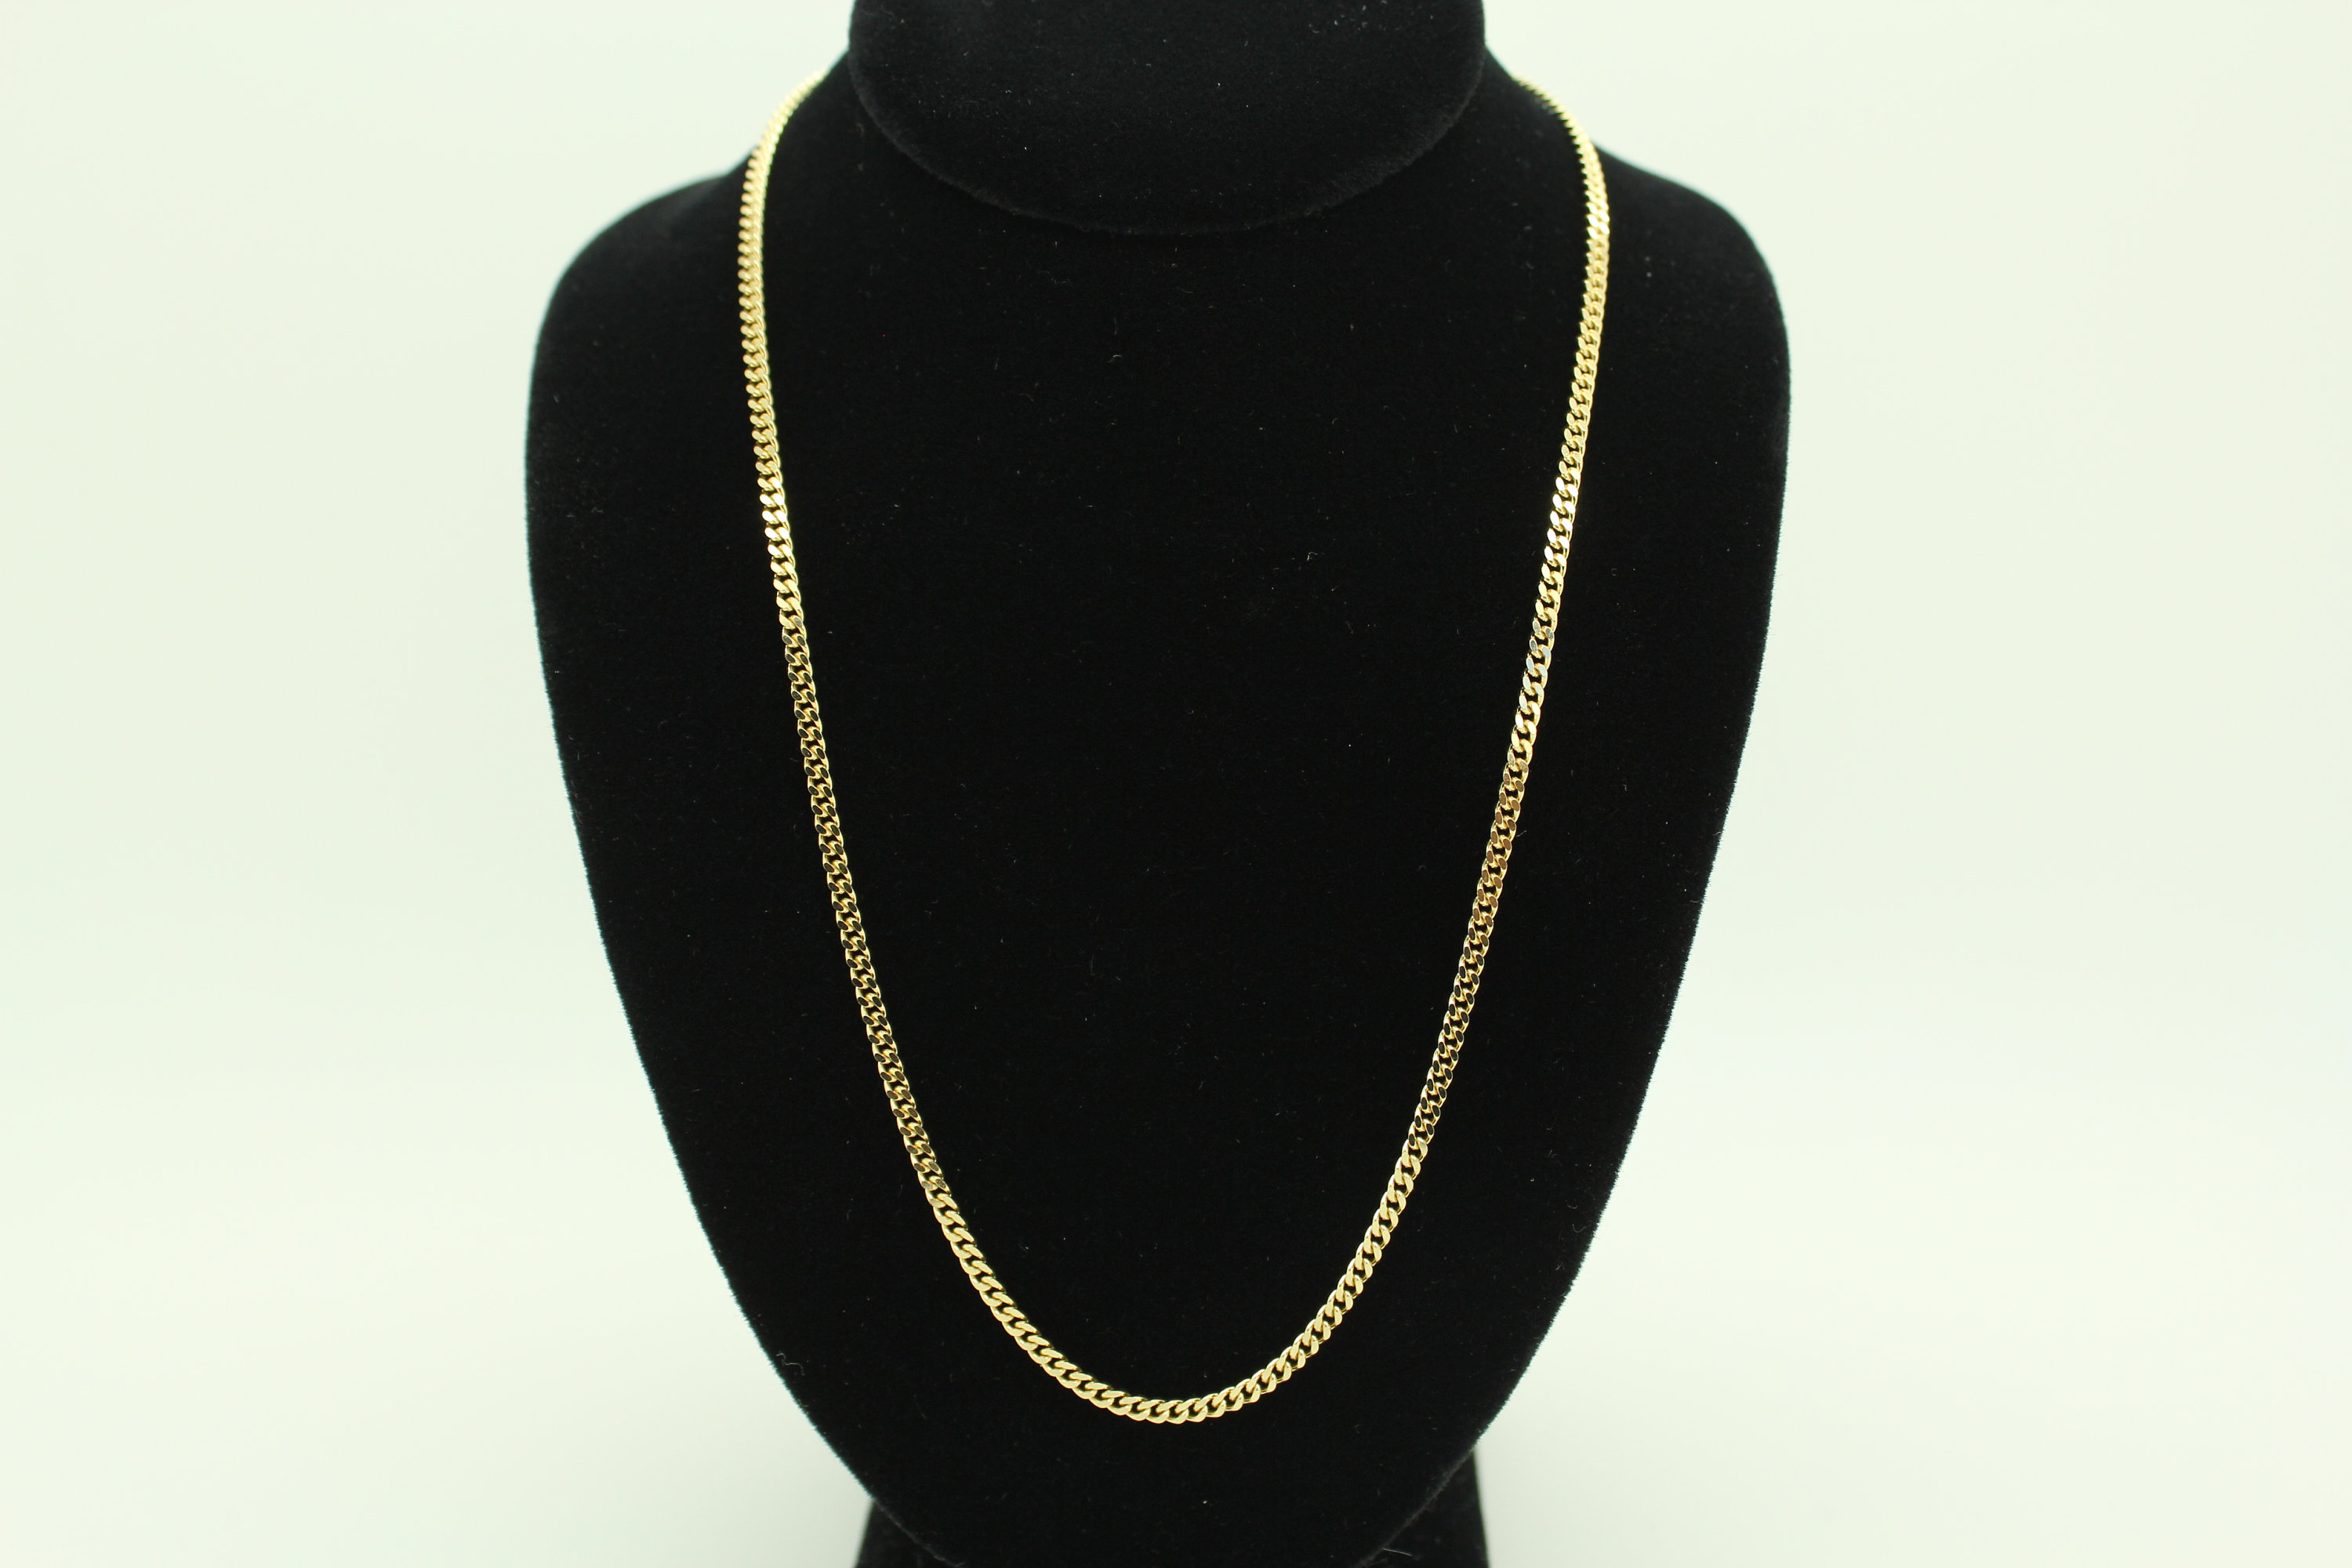 14 K Gold Filled Curb Chain, 2.0 or 2.7 mm 14 20 Gold Dainty Curb Chain CH  #731, Unfinished Cable Jewelry Chain - 1 Foot - 1.5 Curb